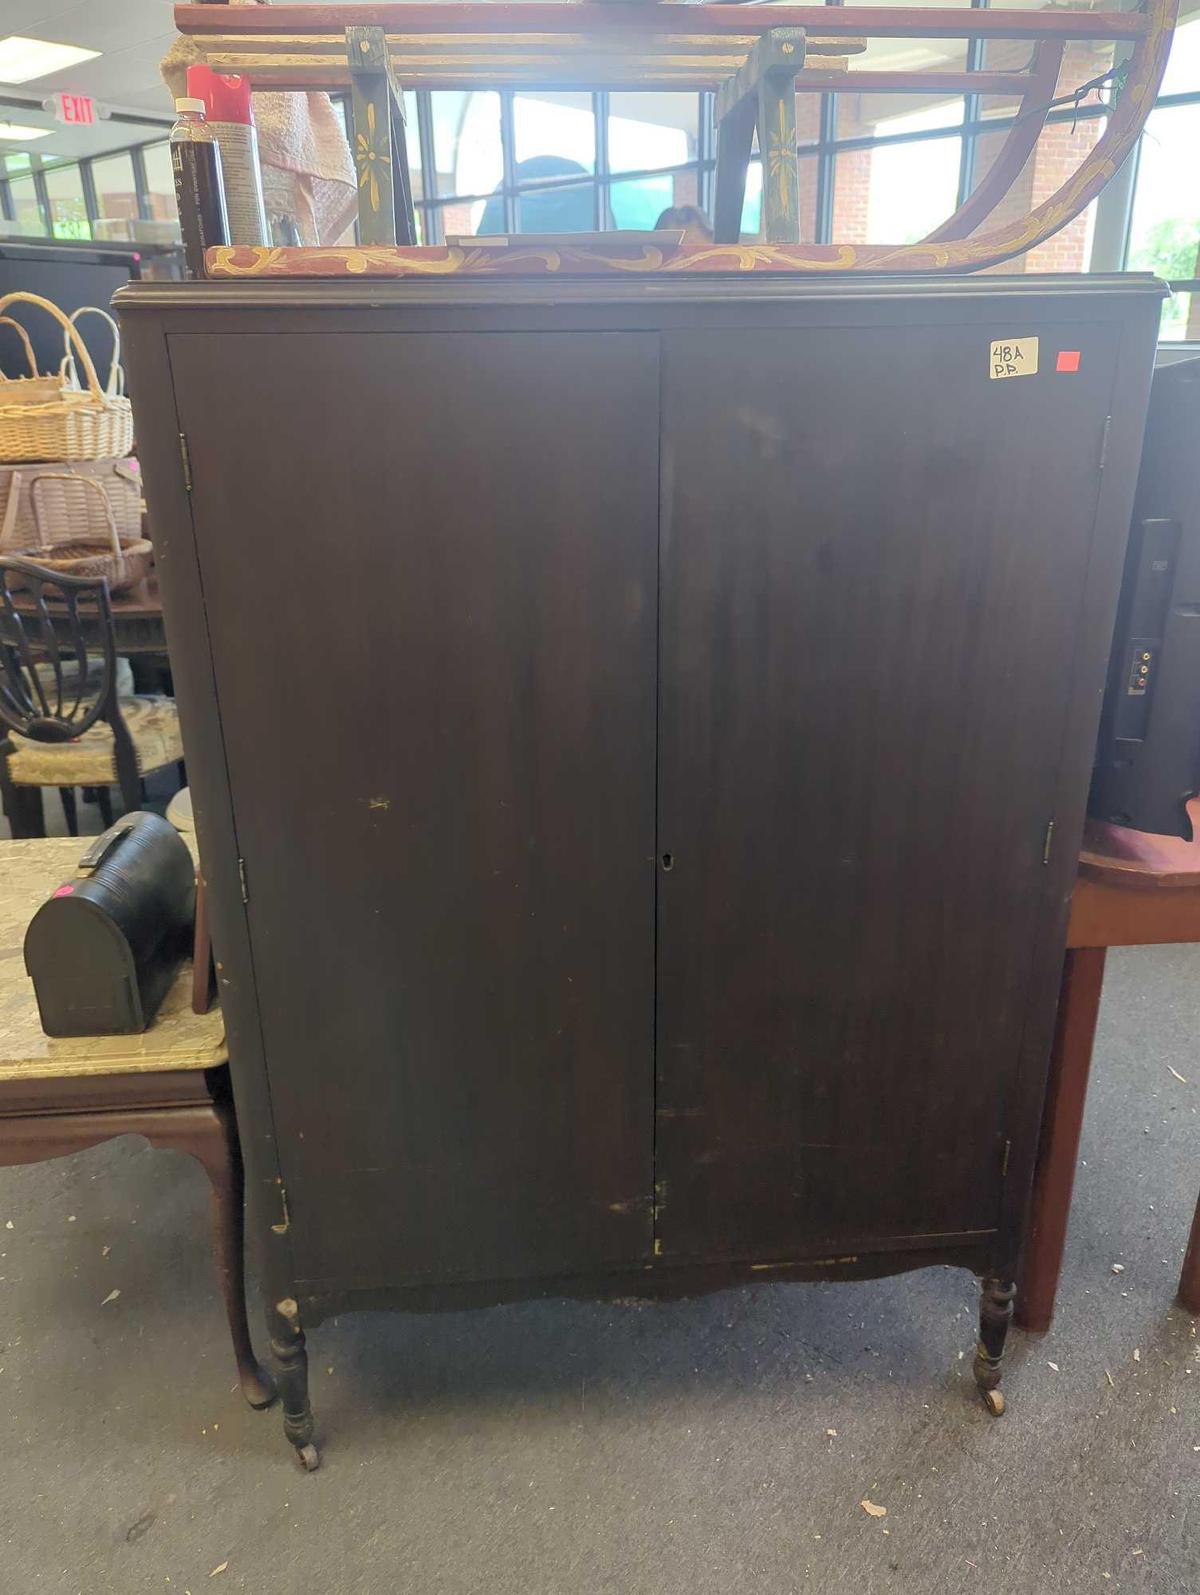 Early 1900's Mens Wardrobe with 2 Doors with 2 Duck Tale Drawers, Mixed Wood of Mahogany, Oak and